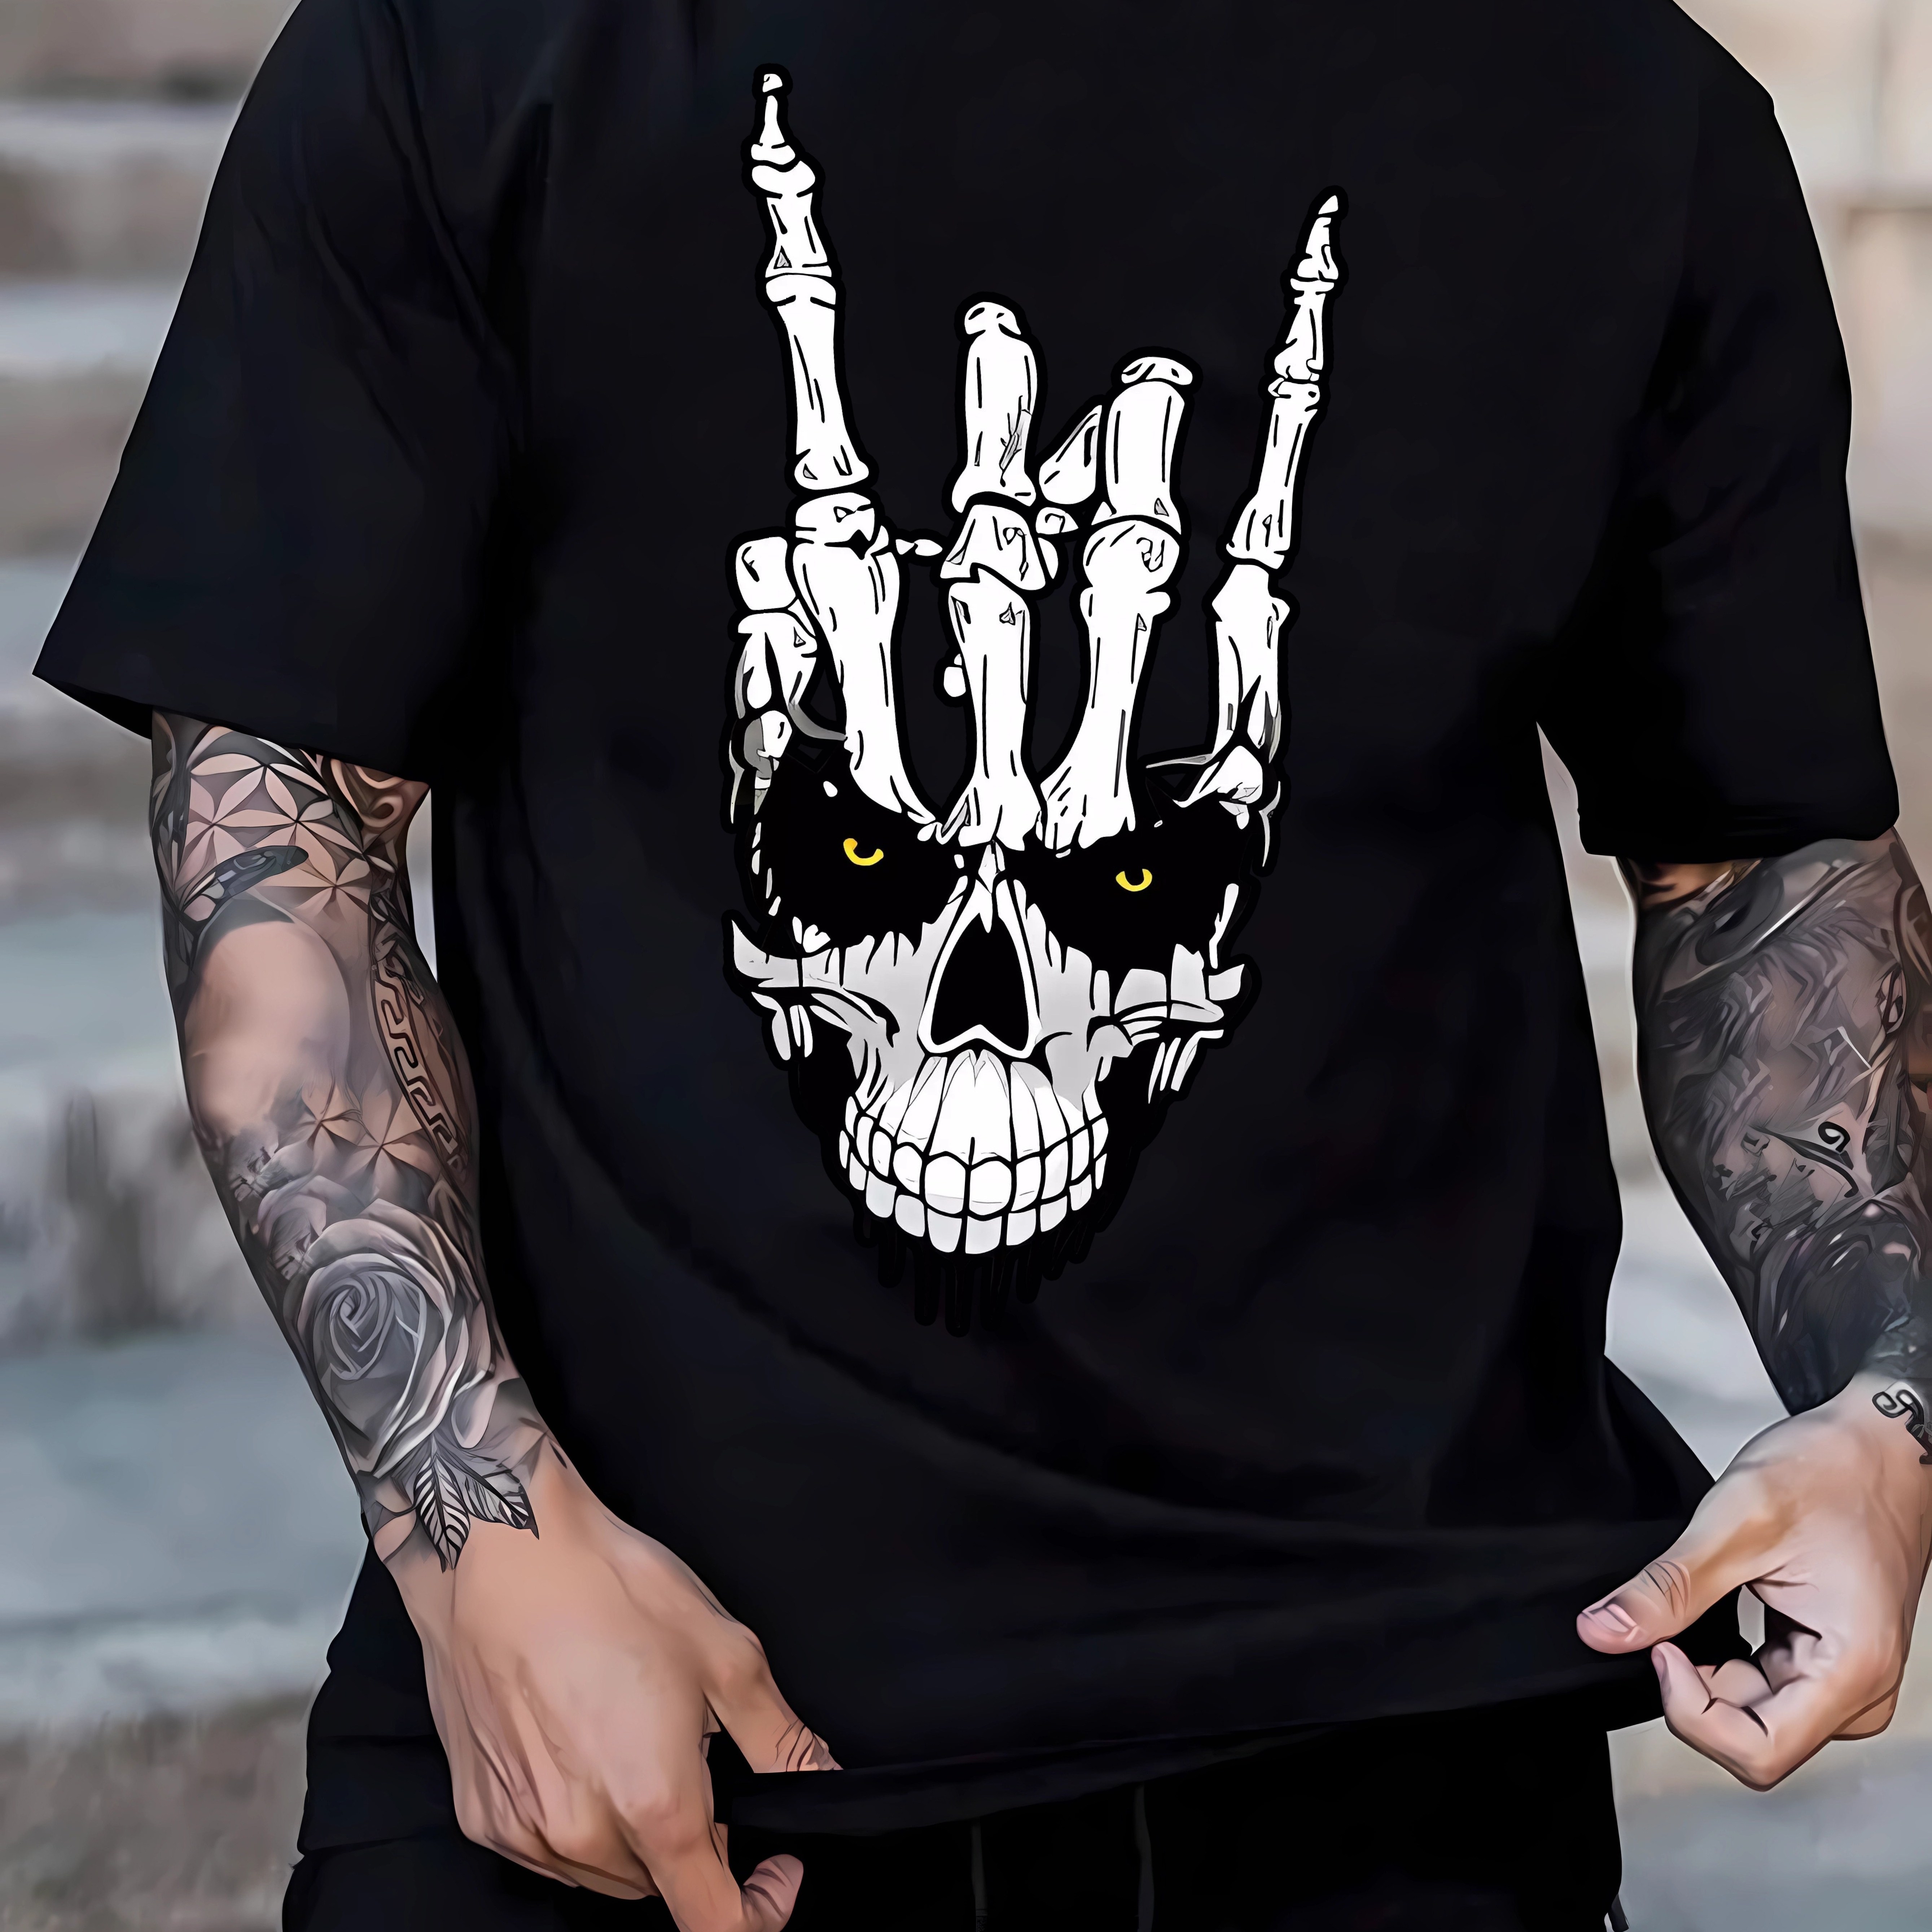 

Skull Hand Print Tee Shirt, Tee For Men, Casual Short Sleeve T-shirt For Summer Spring Fall, Tops As Gifts